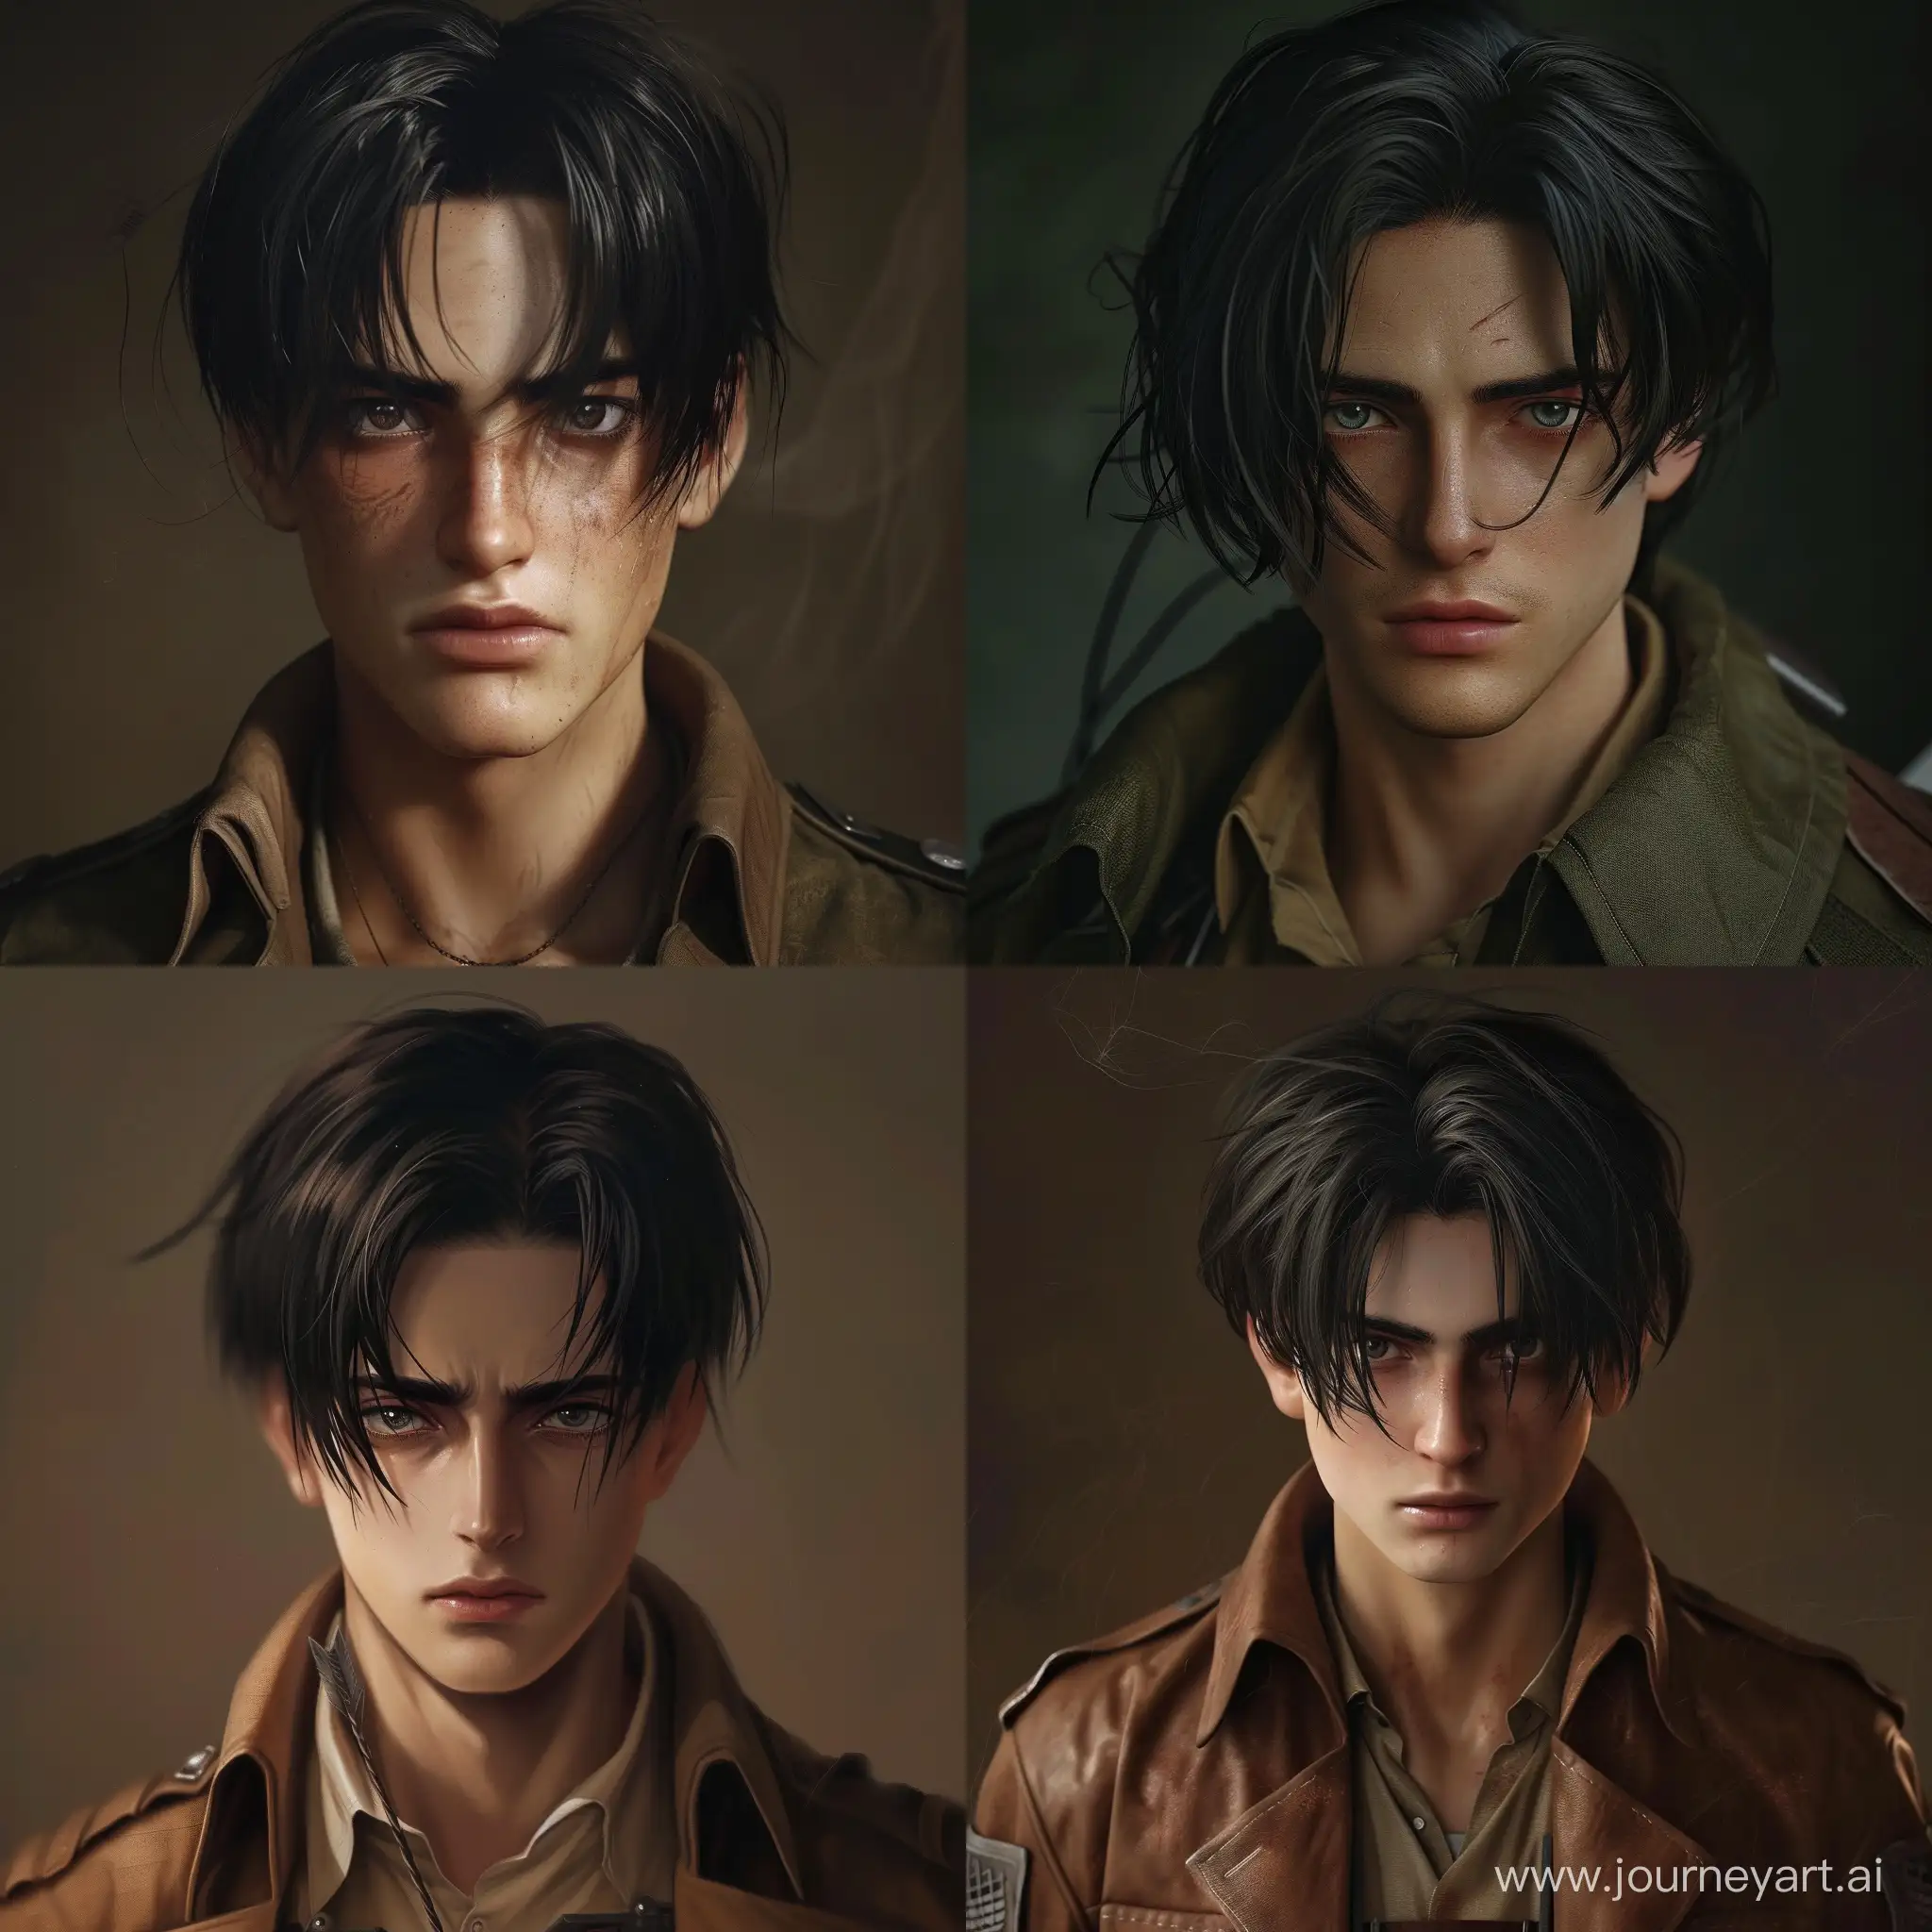 Realistic image of levi Ackerman from attack on titan